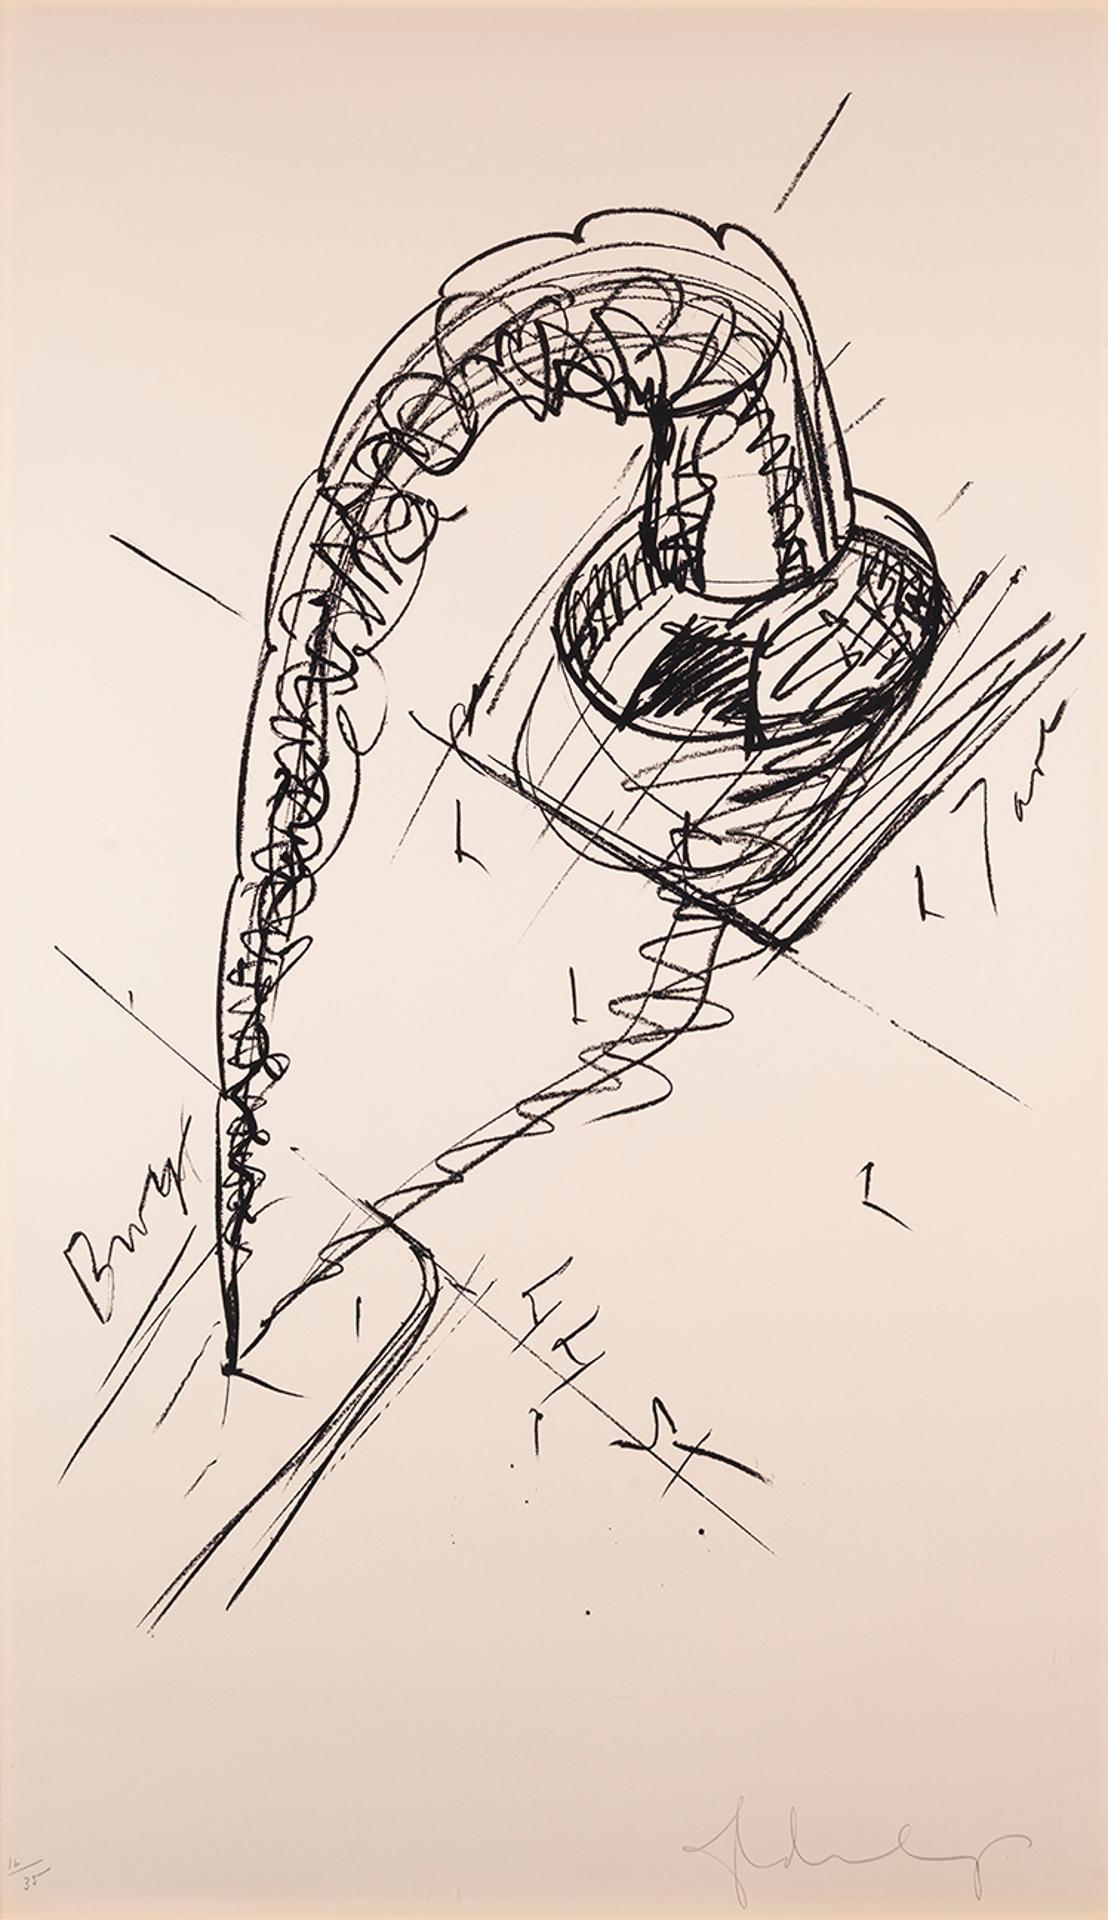 Claes Oldenburg (1929) - Arch in the Form of a Screw, for Times Square NYC